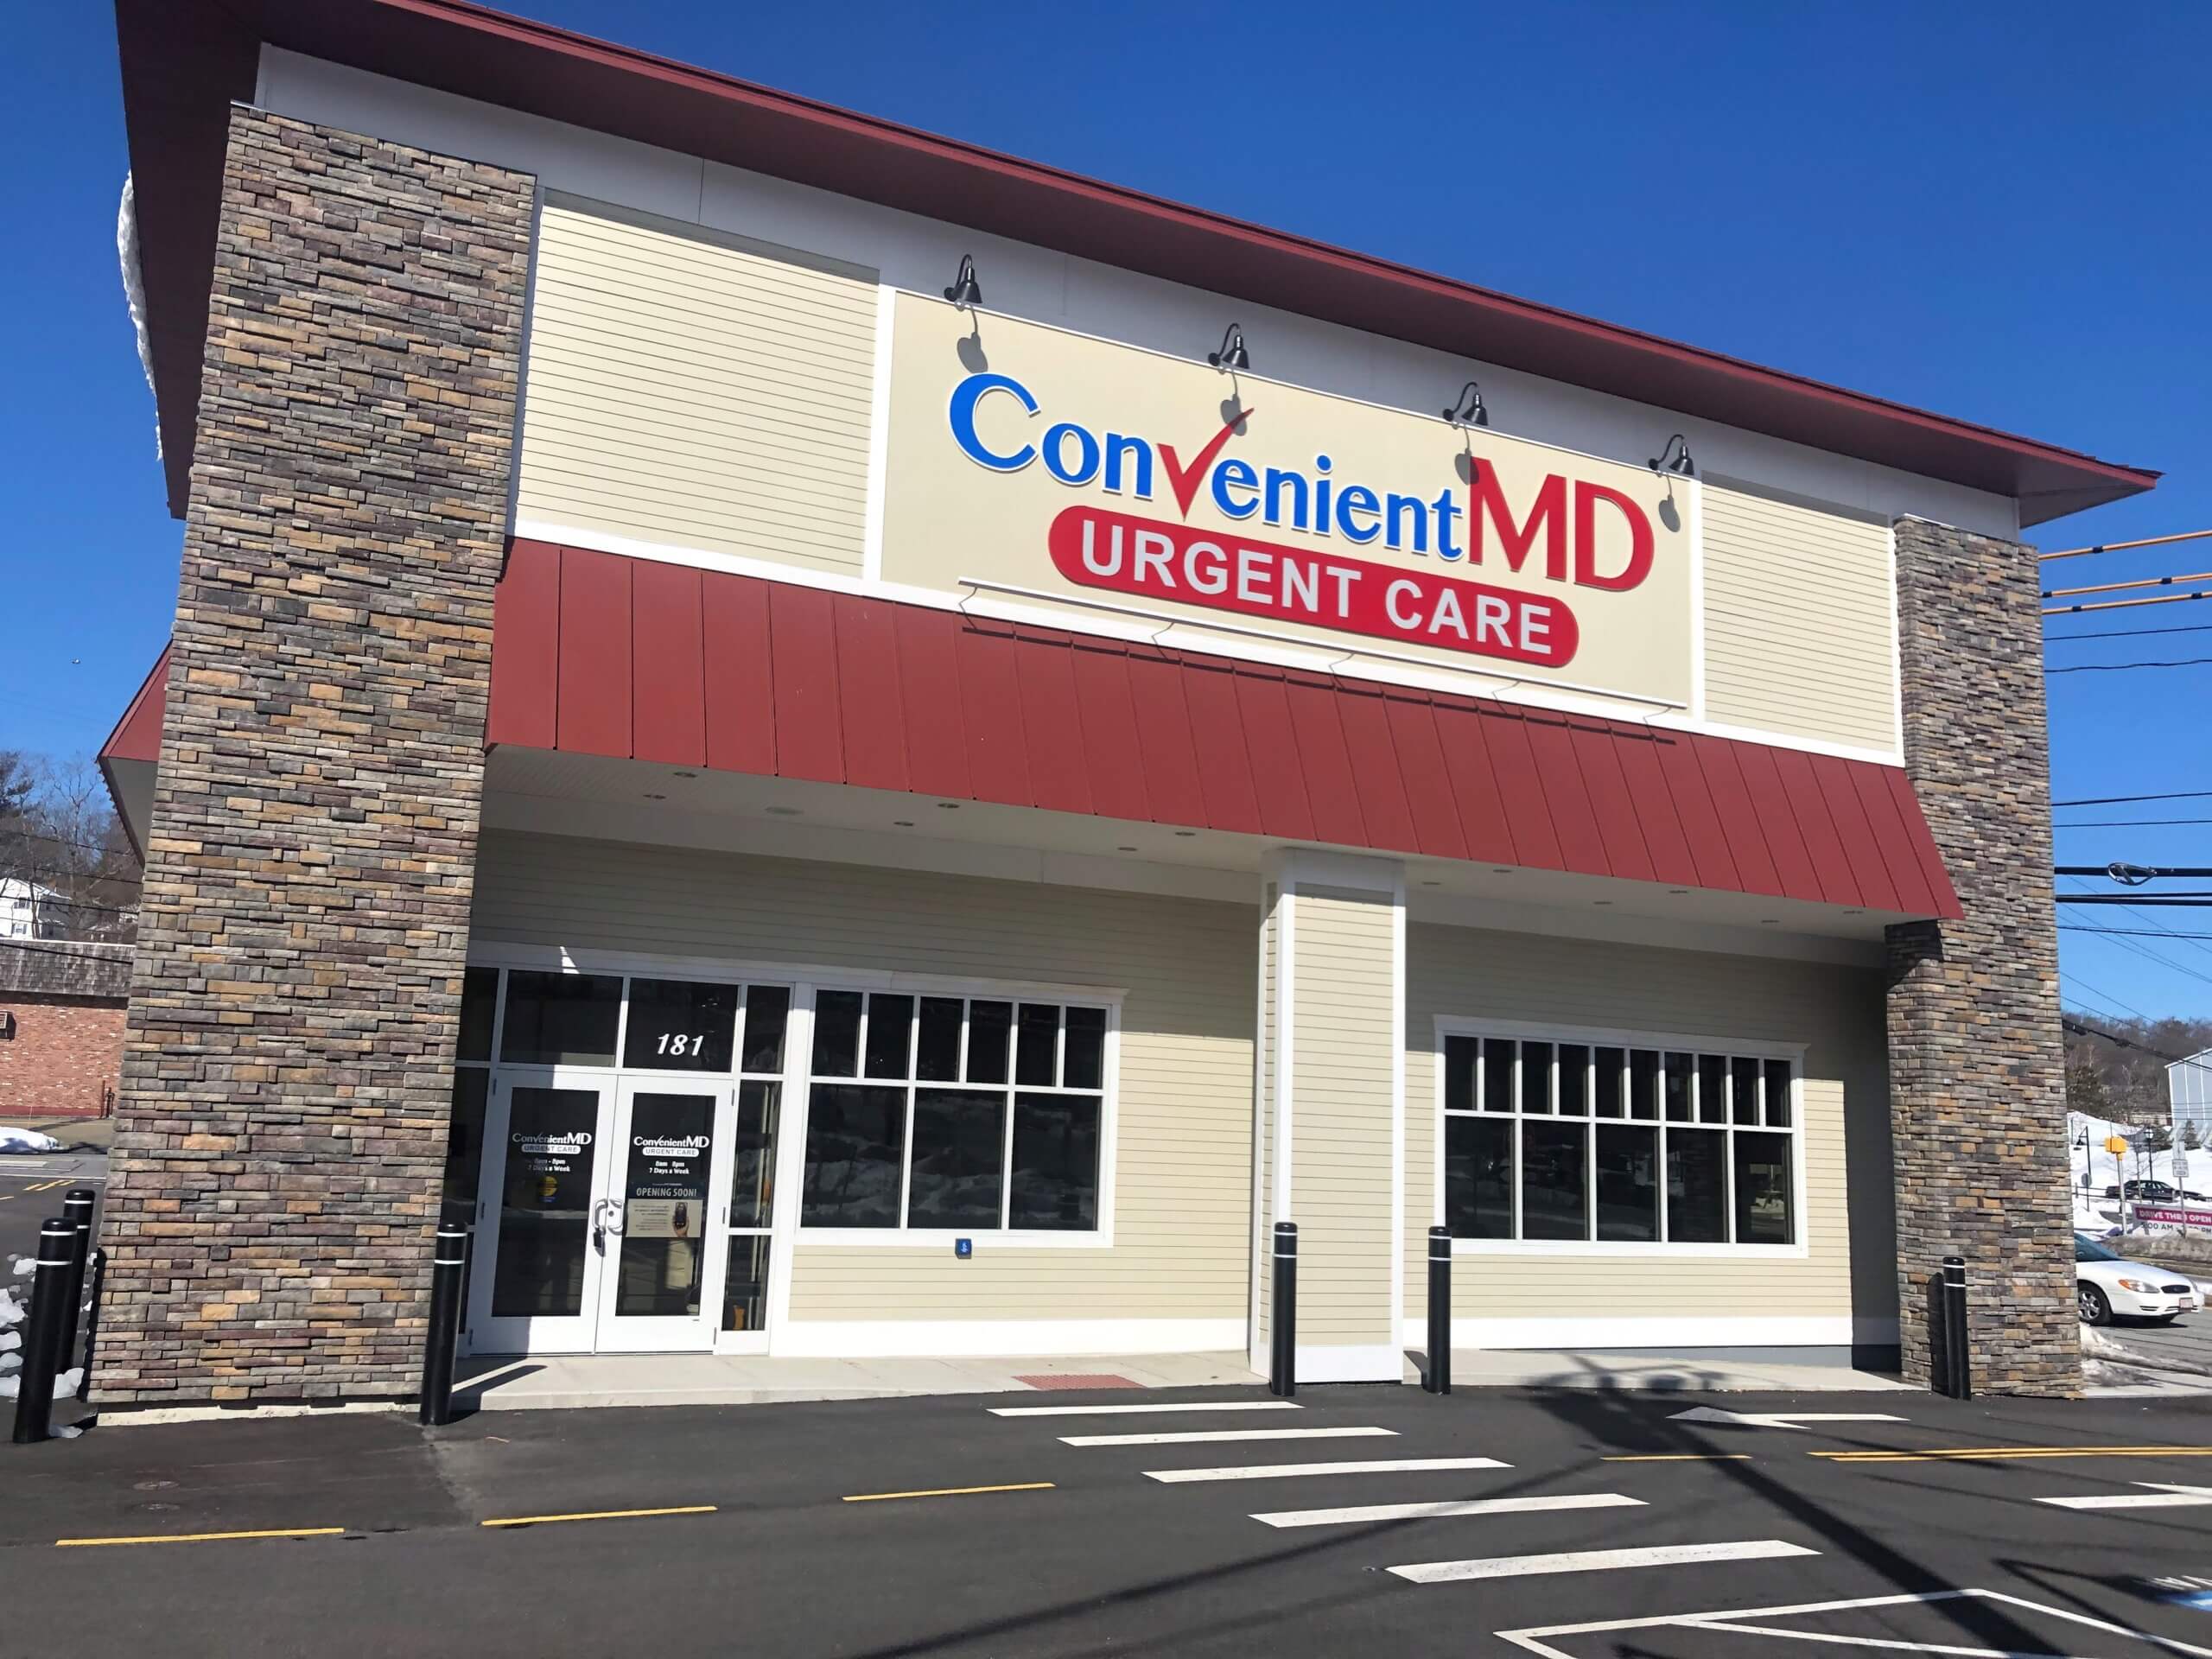 ConvenientMD Urgent Care in Burlington, MA to Open on May 21st